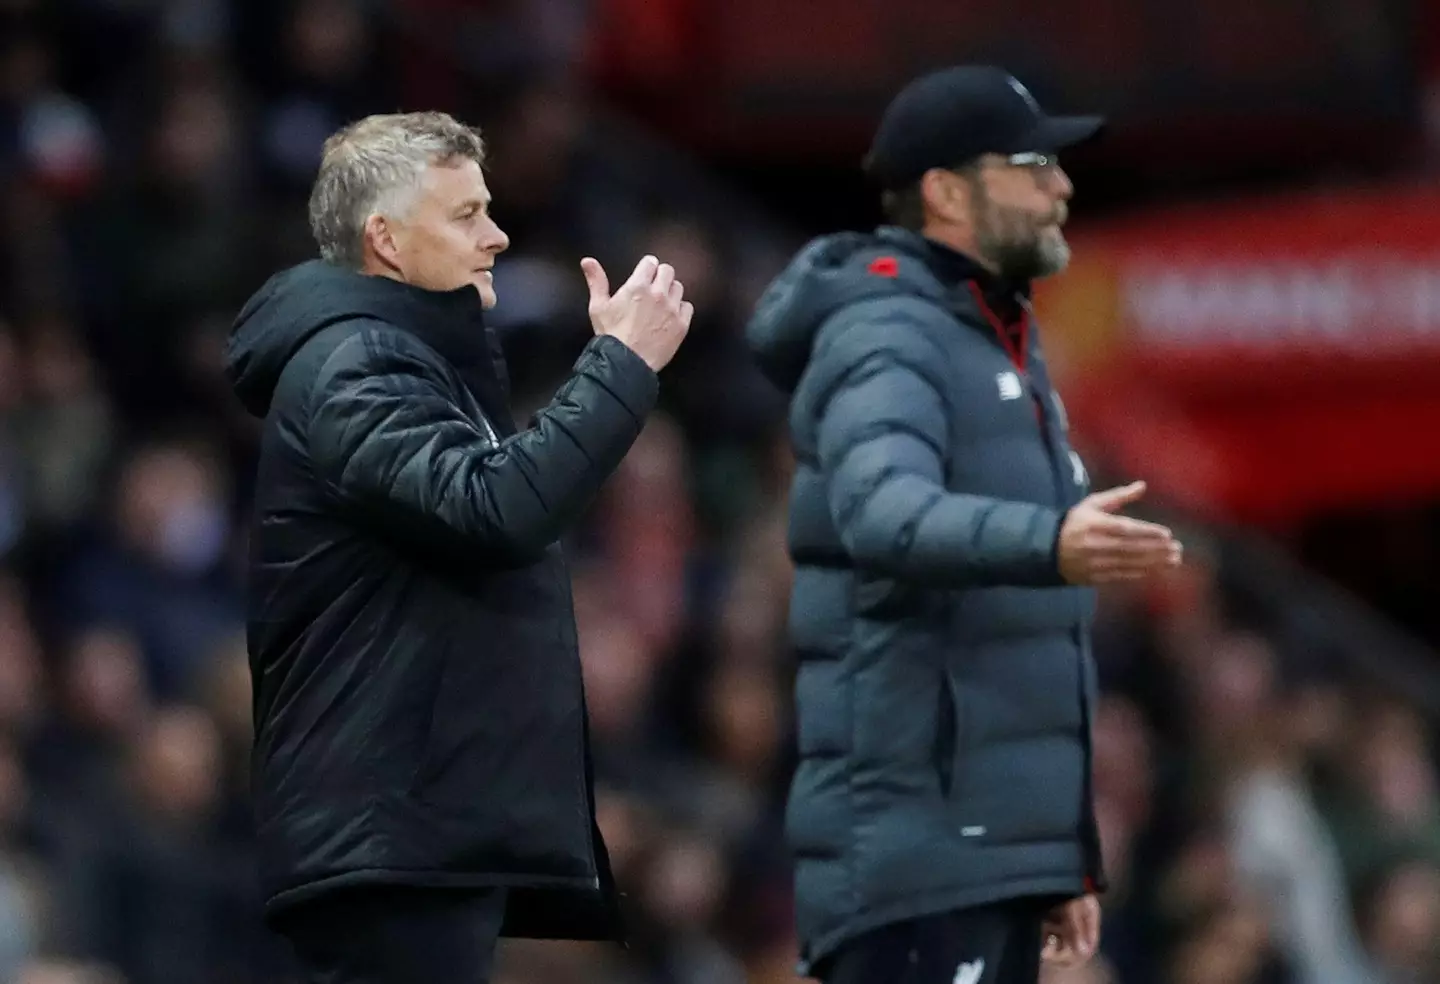 Ole Gunnar Solskjaer's first competitive match against Liverpool as United manager ended as a goalless draw (Image: Alamy)